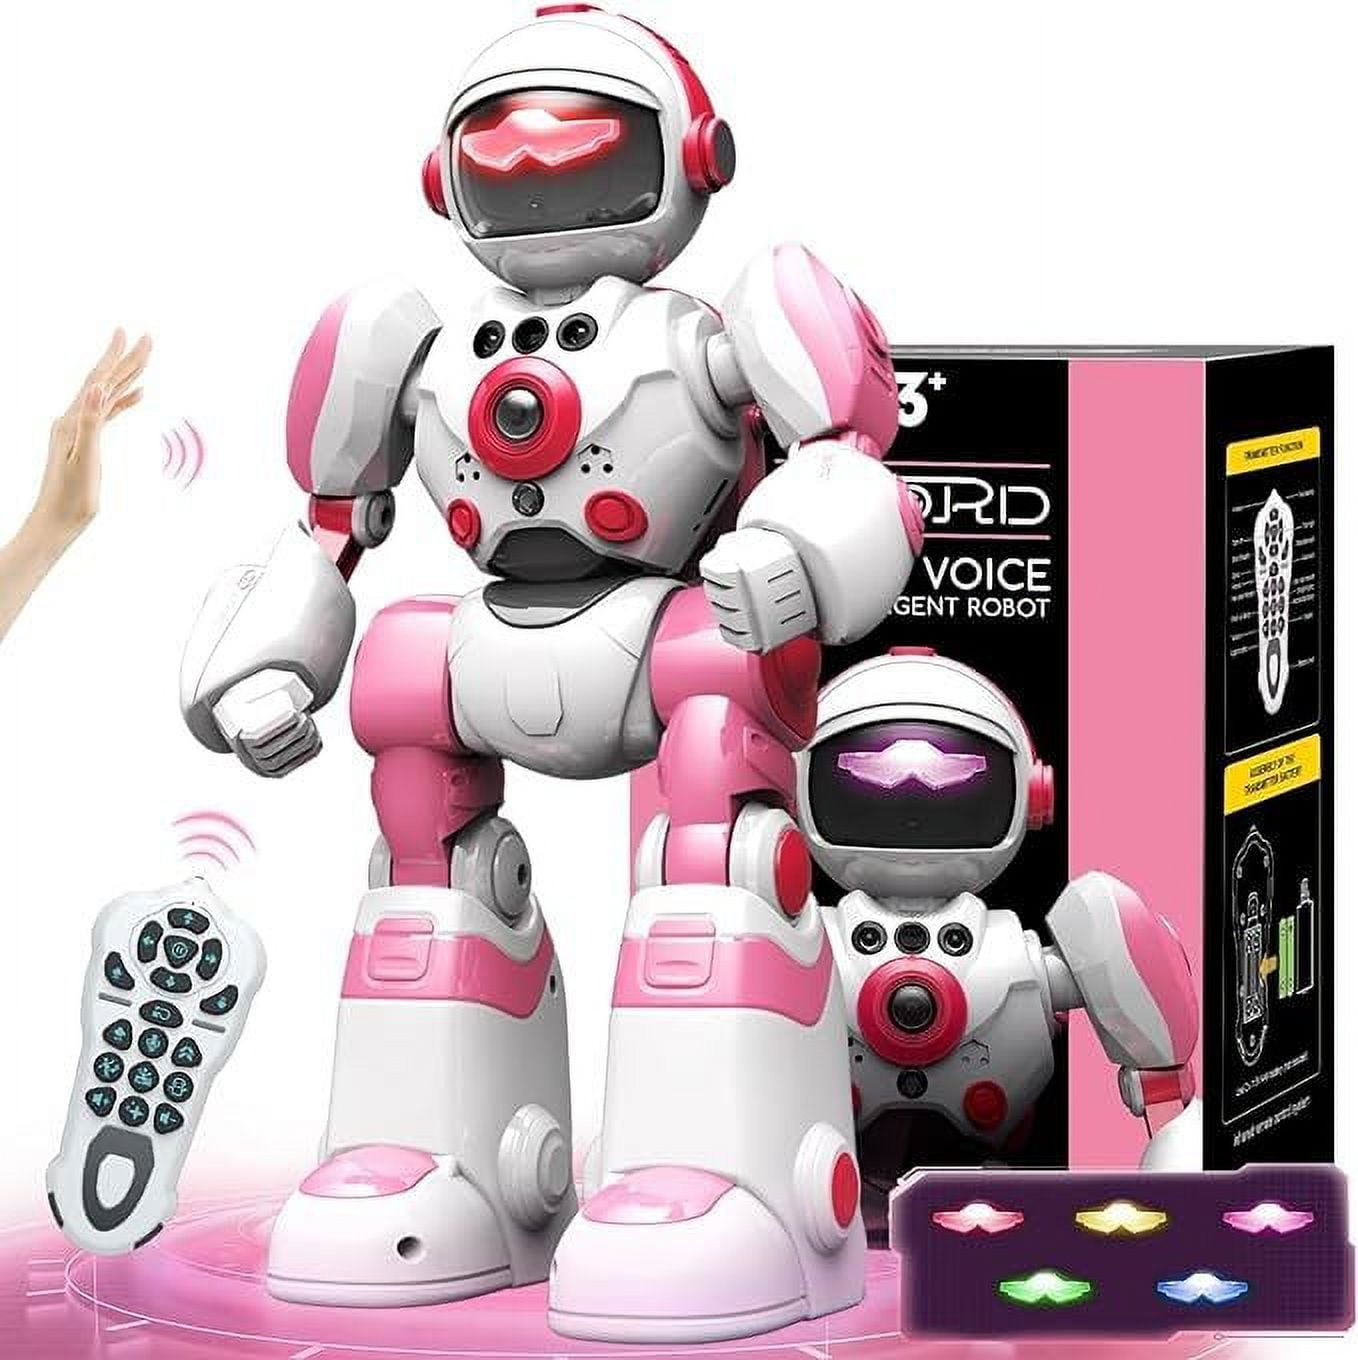 Lexibook Powerman Educational Robot in Portuguese for Playing and Learning  - White